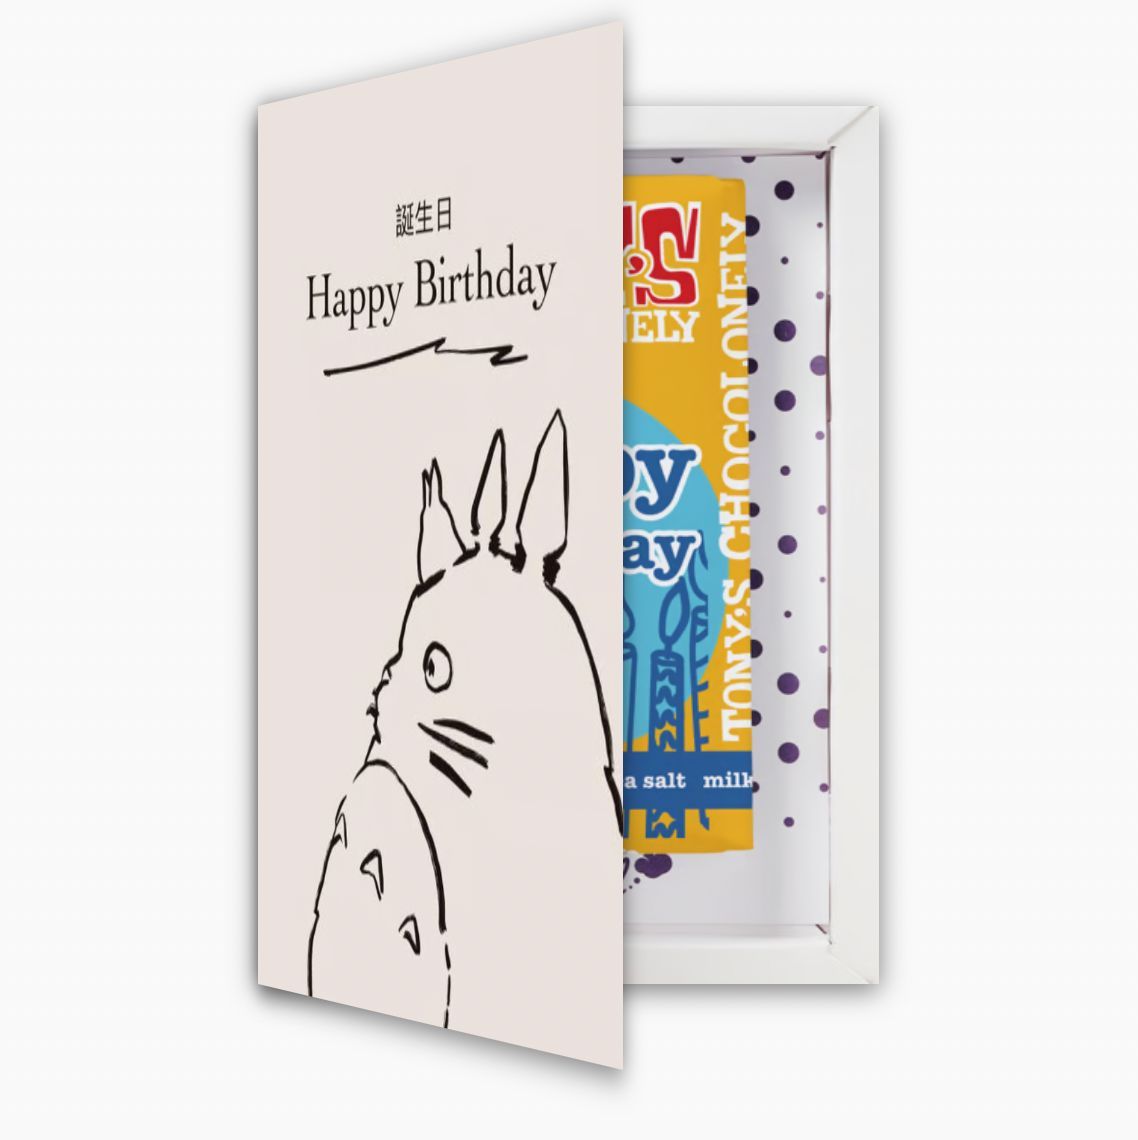 Finding a birthday card can be a faff 👀 Thortful makes it easy! Check out my #anime themed #birthdaycard design on there! 😍 You can choose from a simple A5 card to even ones with Tony's Chocolate inside! ✨ Shop this card design and more on Thortful - buff.ly/49wplZ0